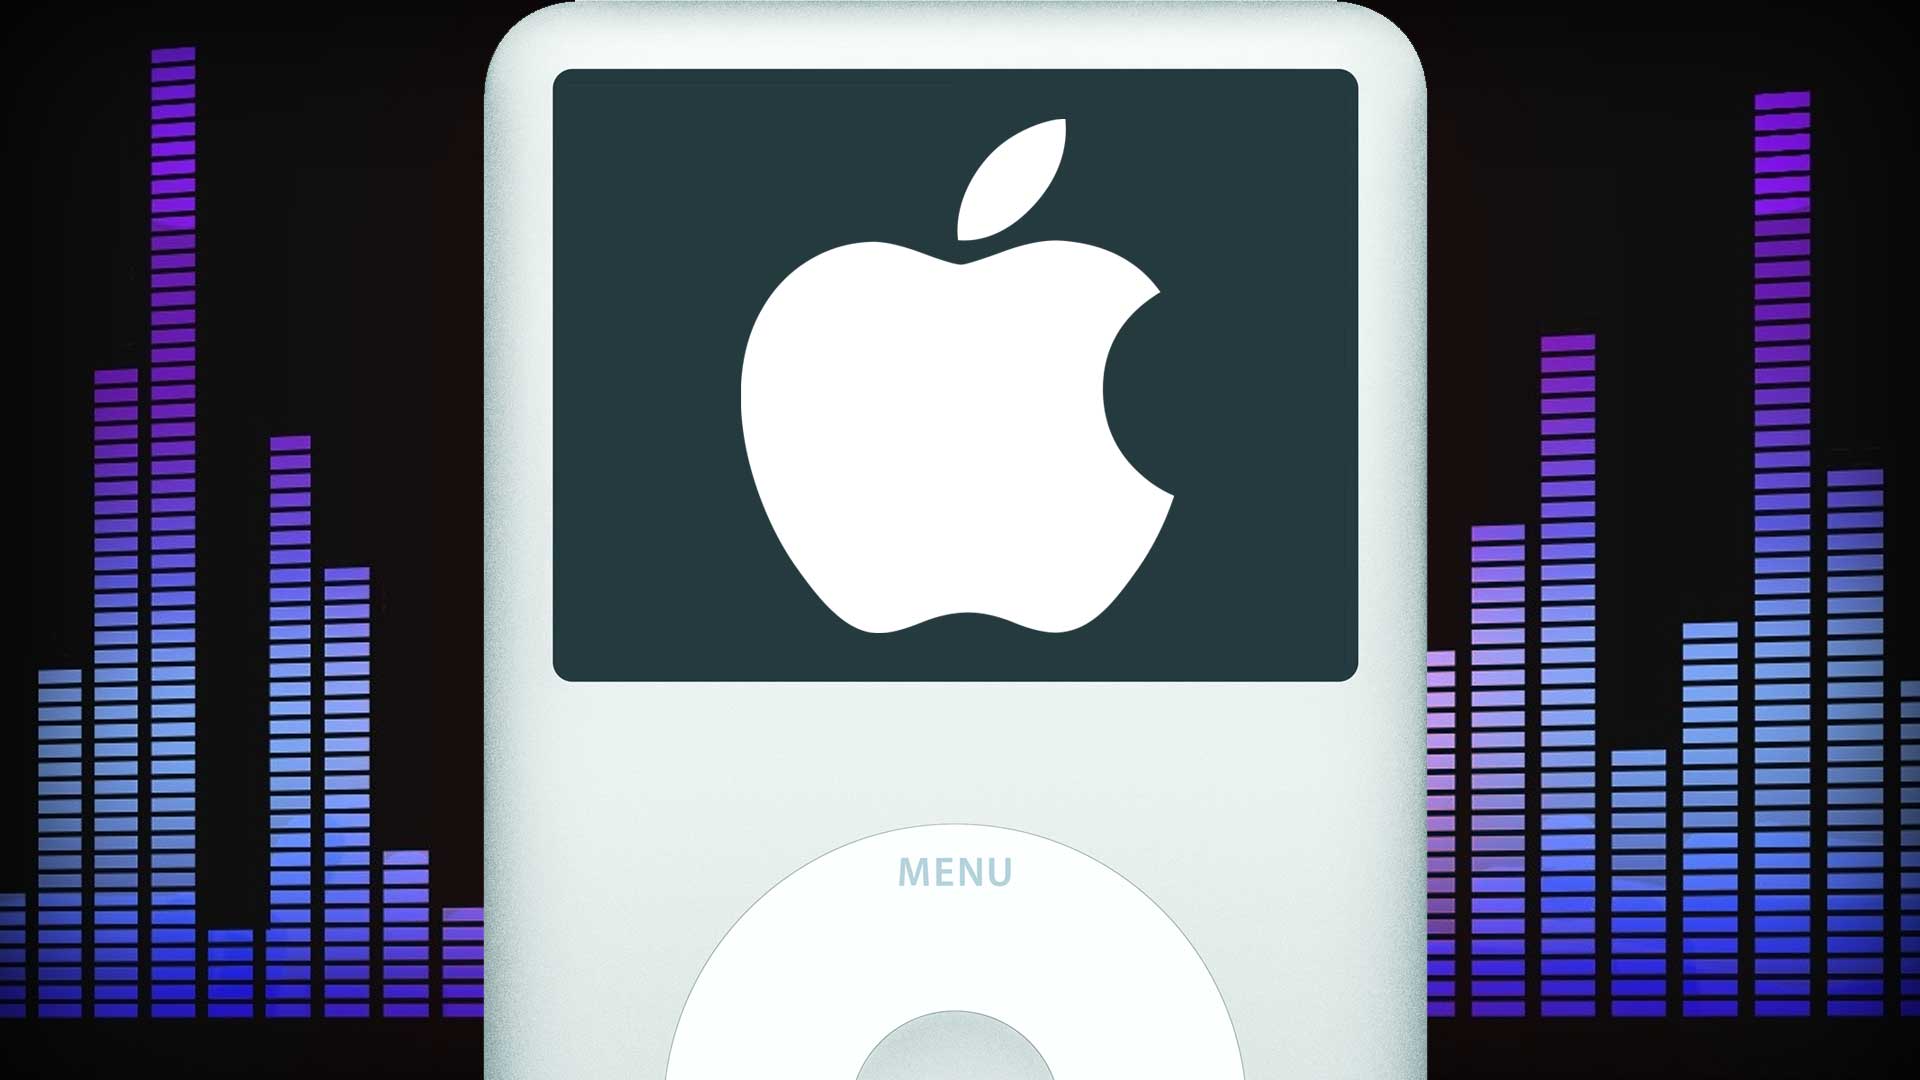 Apple Fails to Fix Known Audio Defect Before Releasing iPod Photo